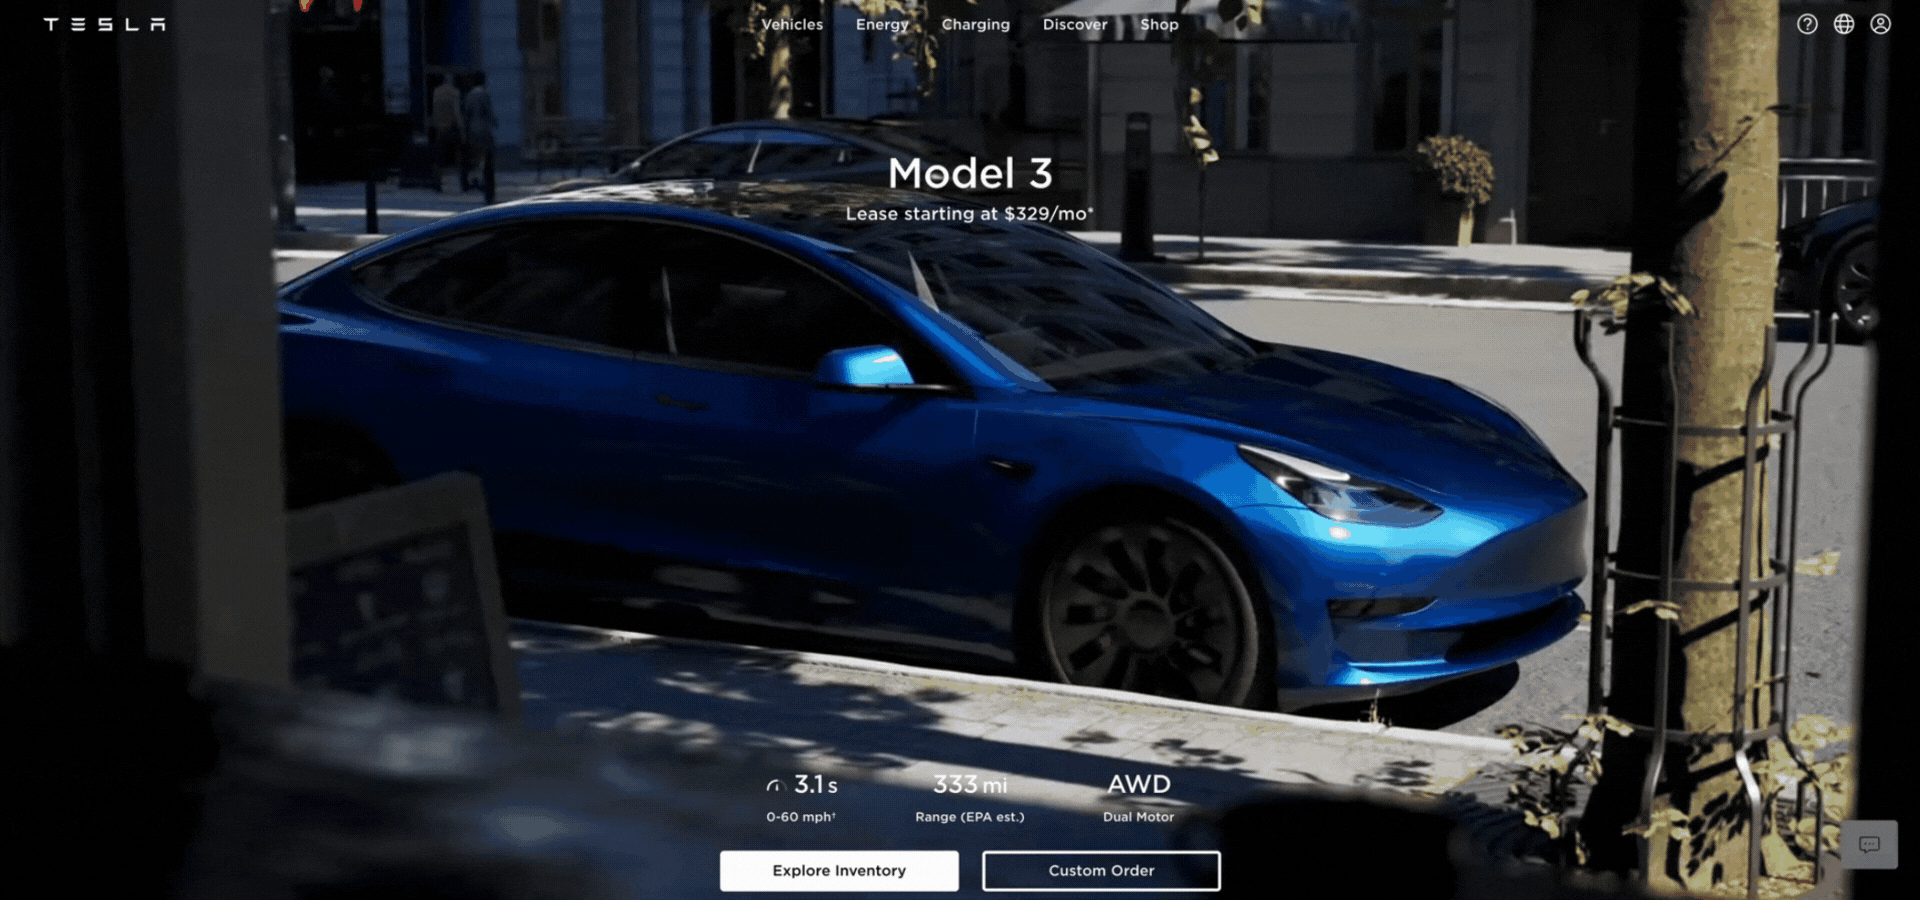 Tesla's technology website design stands out with high-quality video, graphics, and concise copy.